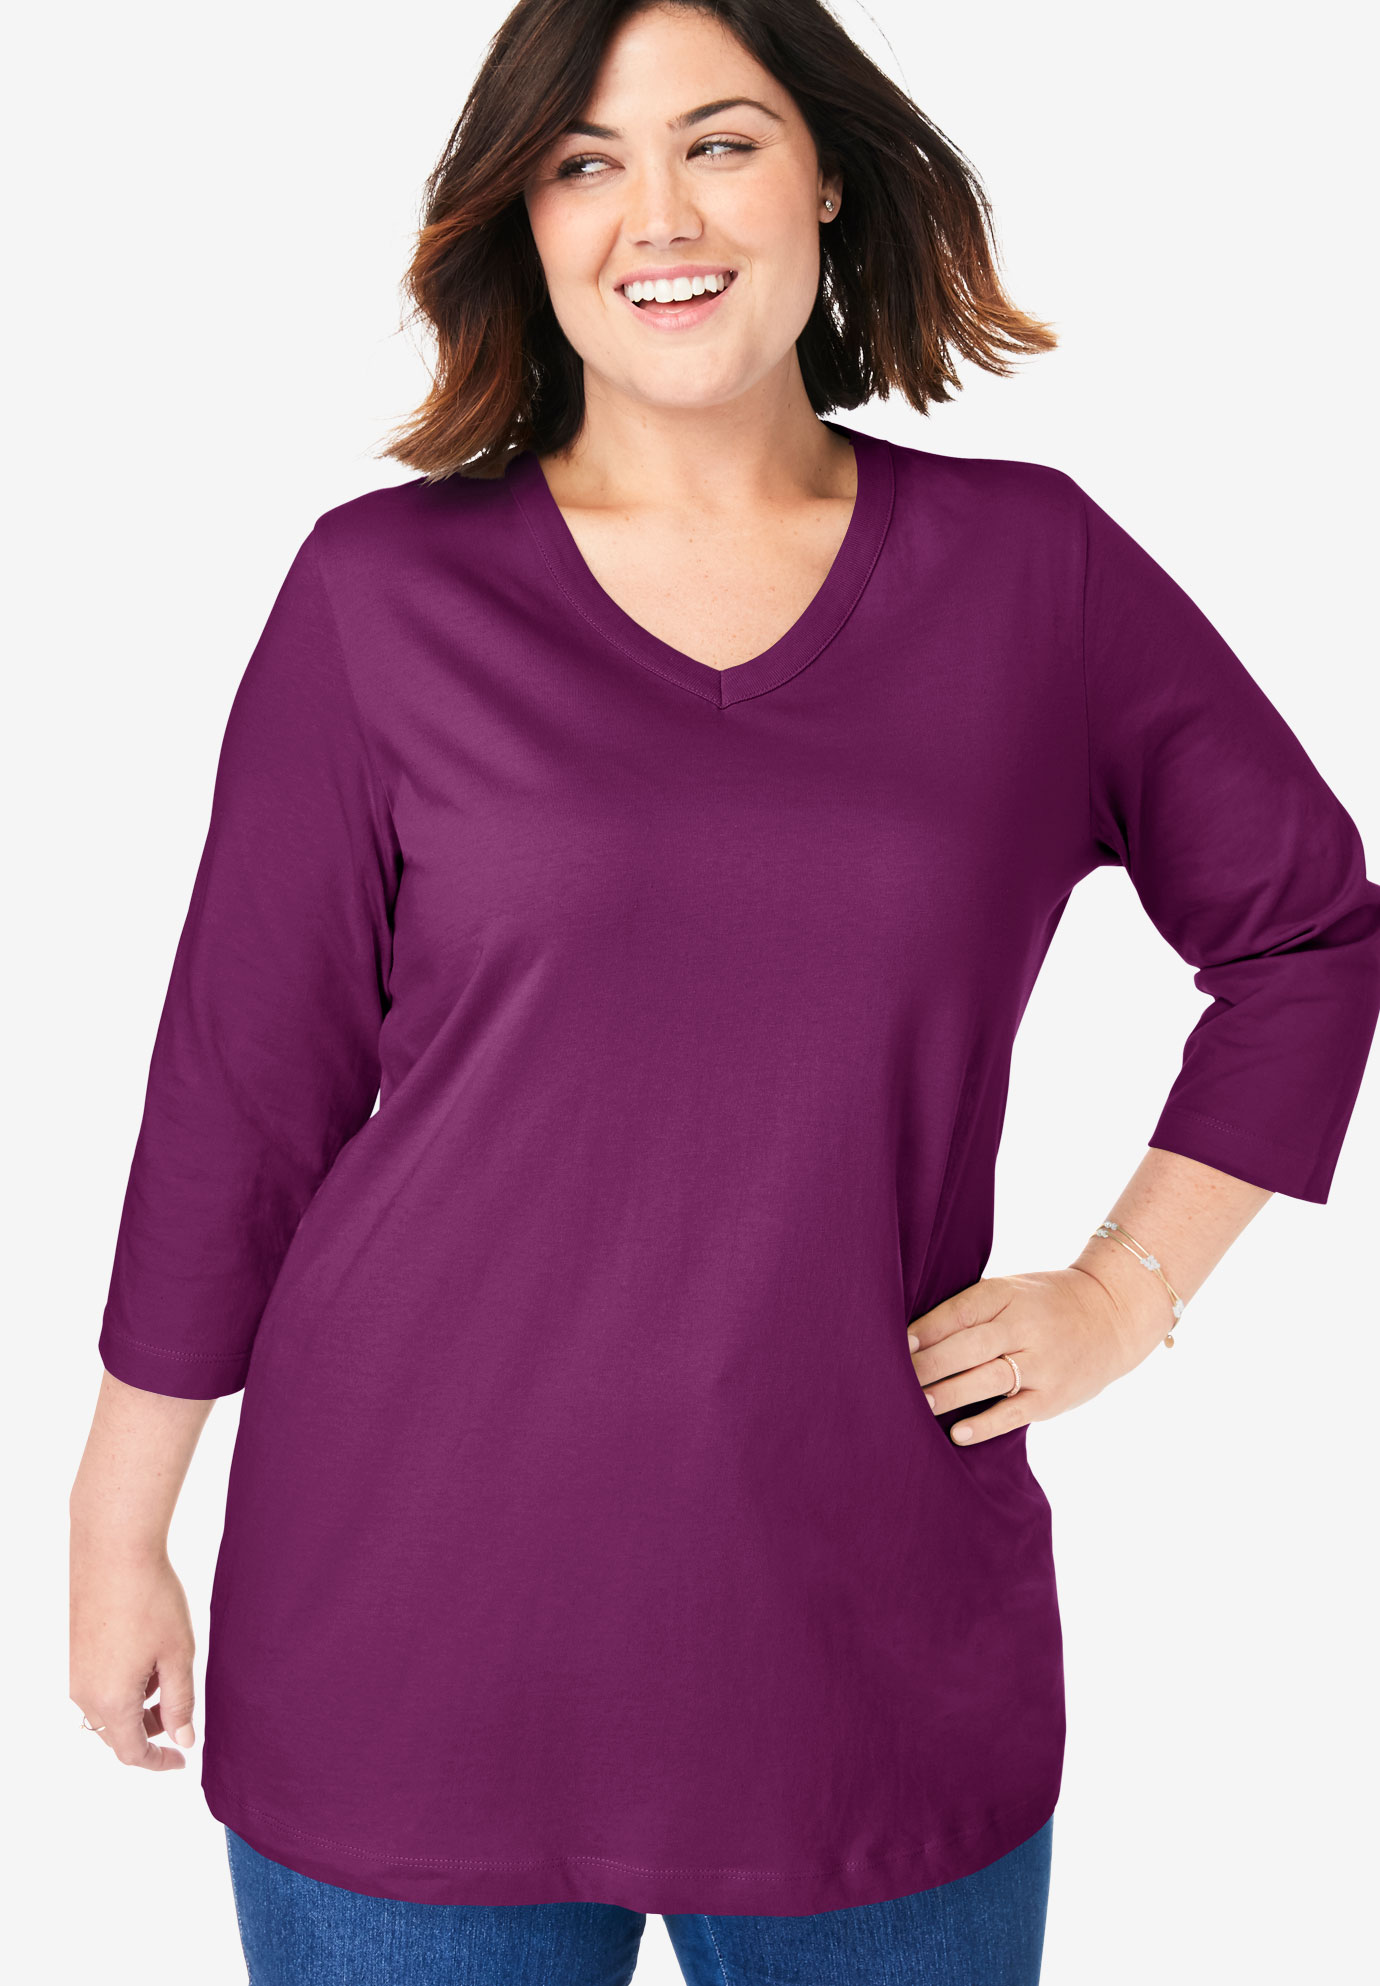 Perfect V-Neck Three-Quarter Sleeve Tee| Plus Size T-Shirts | Woman Within